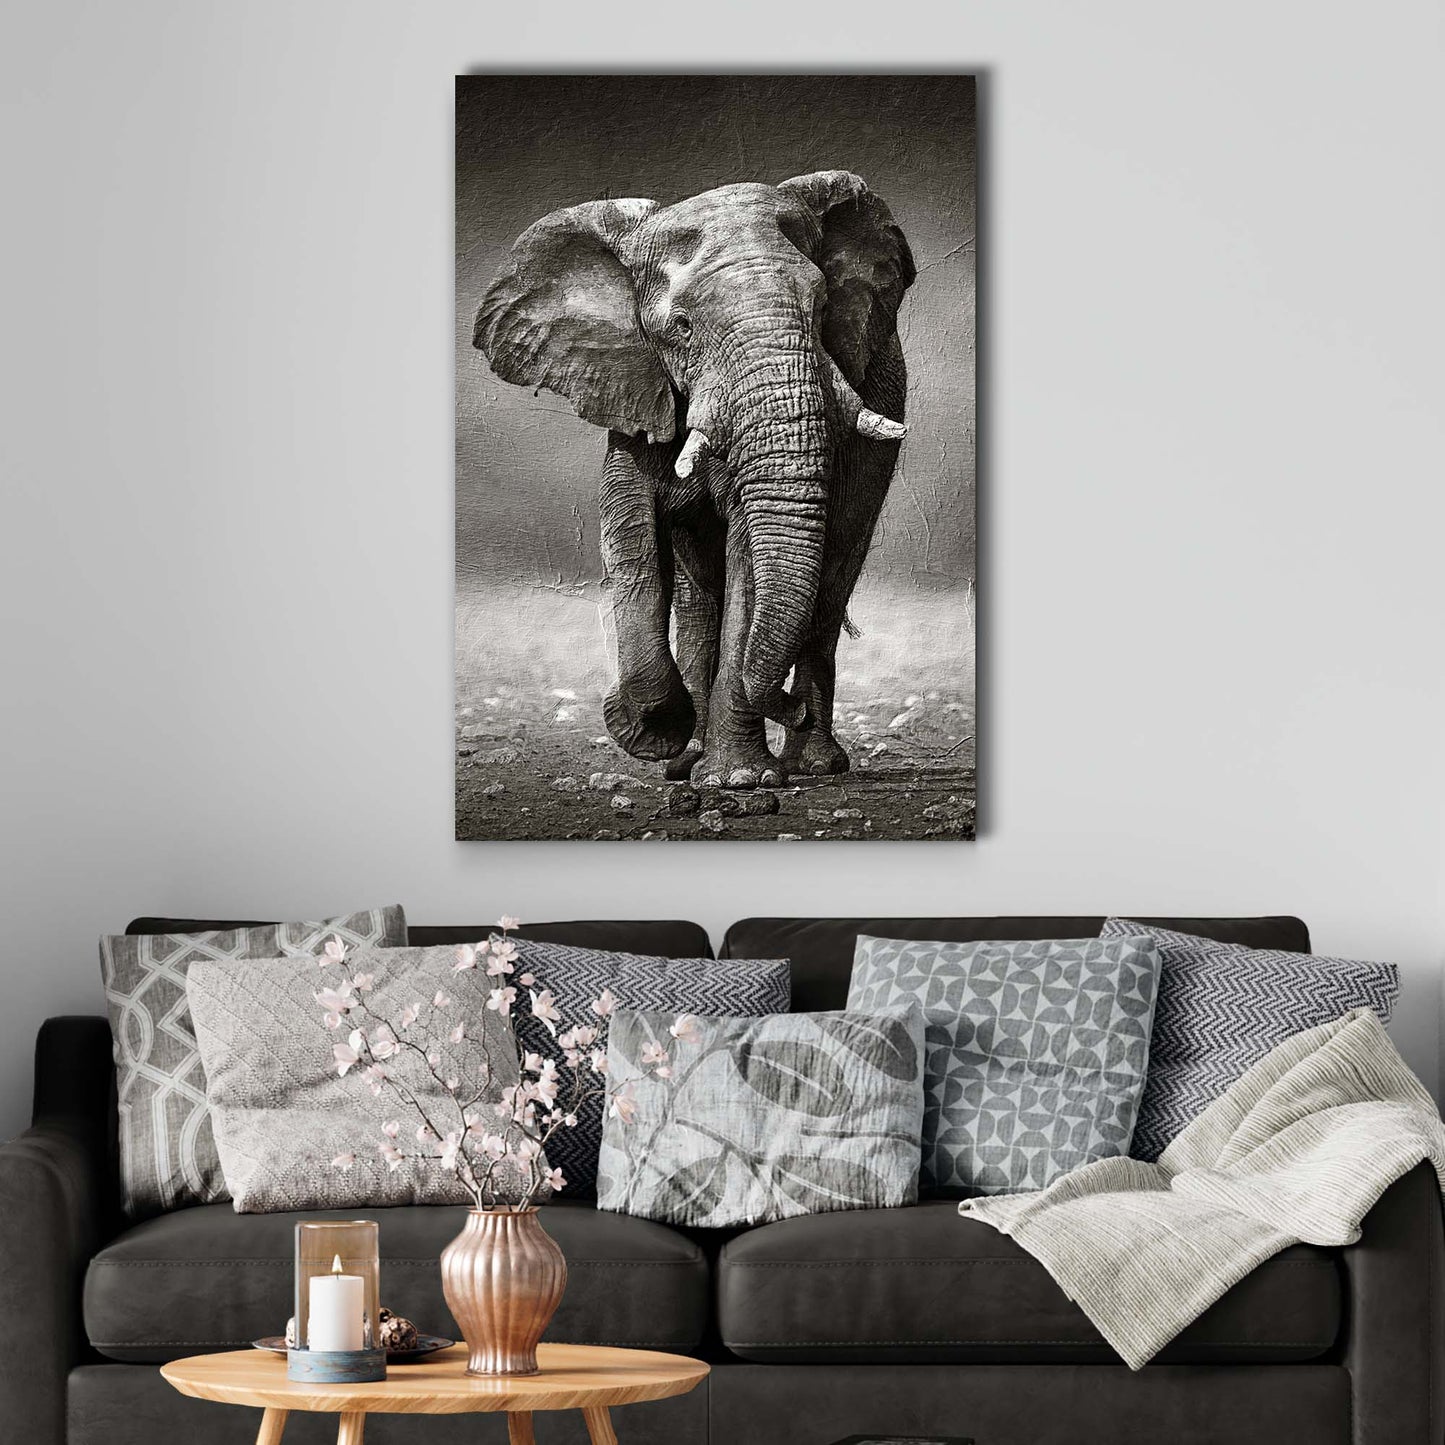 Grayscale Walking Elephant Portrait Canvas Wall Art - Image by Tailored Canvases